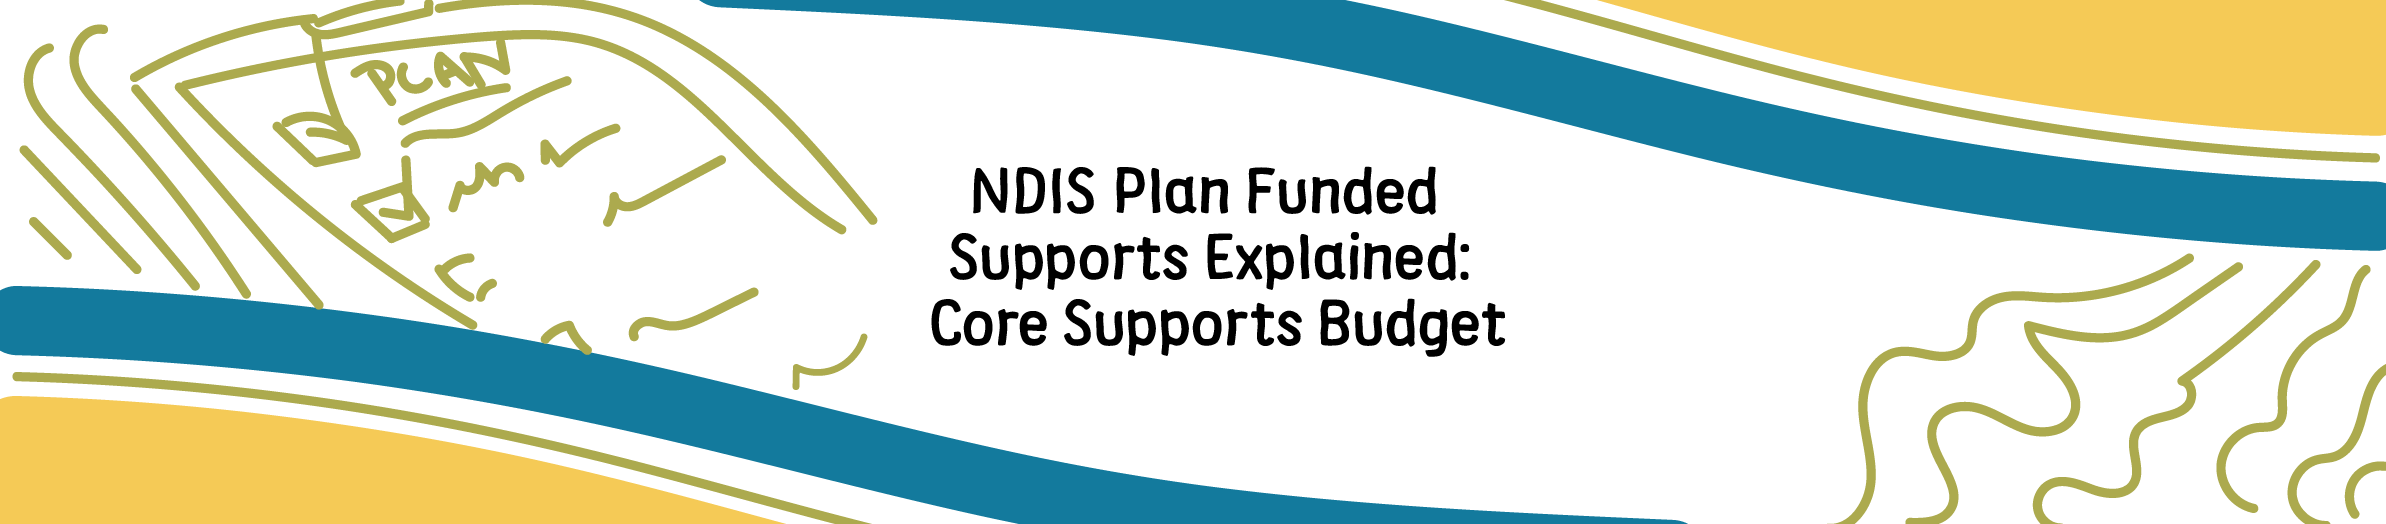 Featured image: NDIS Plan Funded Supports Explained: Core Supports Budget - Read full post: NDIS Plan Funded Supports Explained: Core Supports Budget